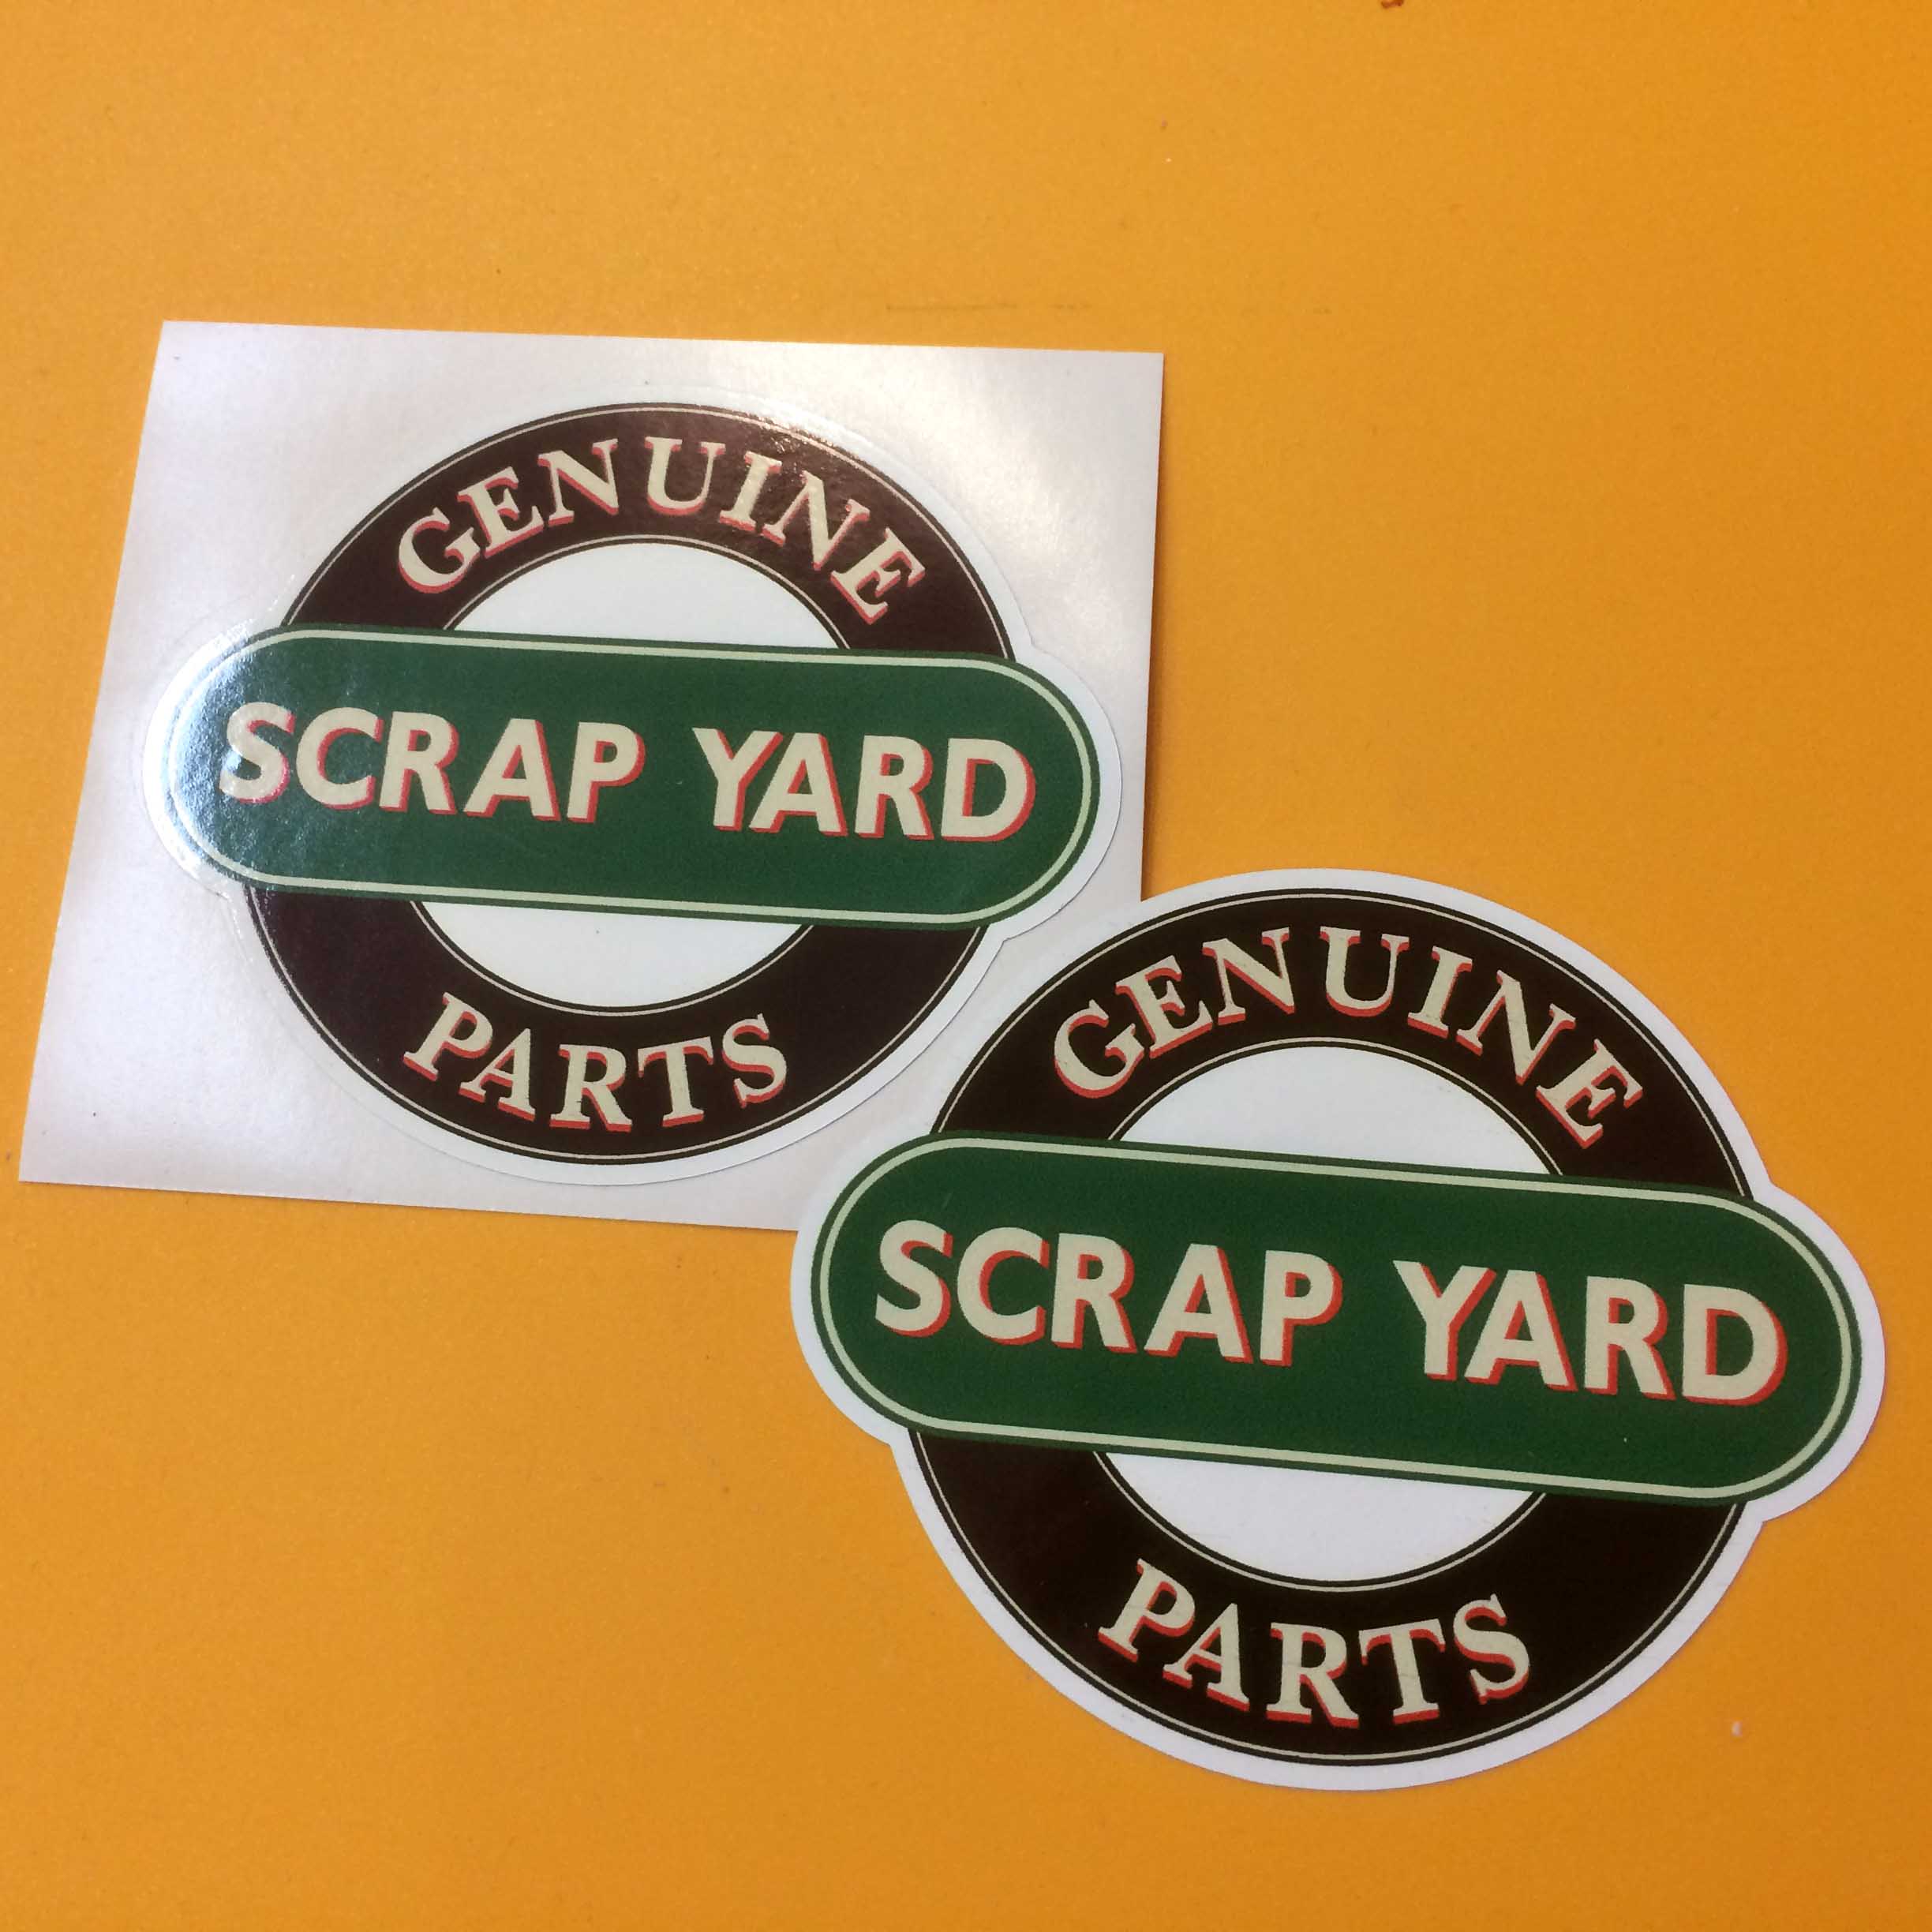 Two concentric circles in black and white. Genuine Parts in red and white lettering surrounds the black outer circle. Scrap Yard on a green banner sits across the centre.